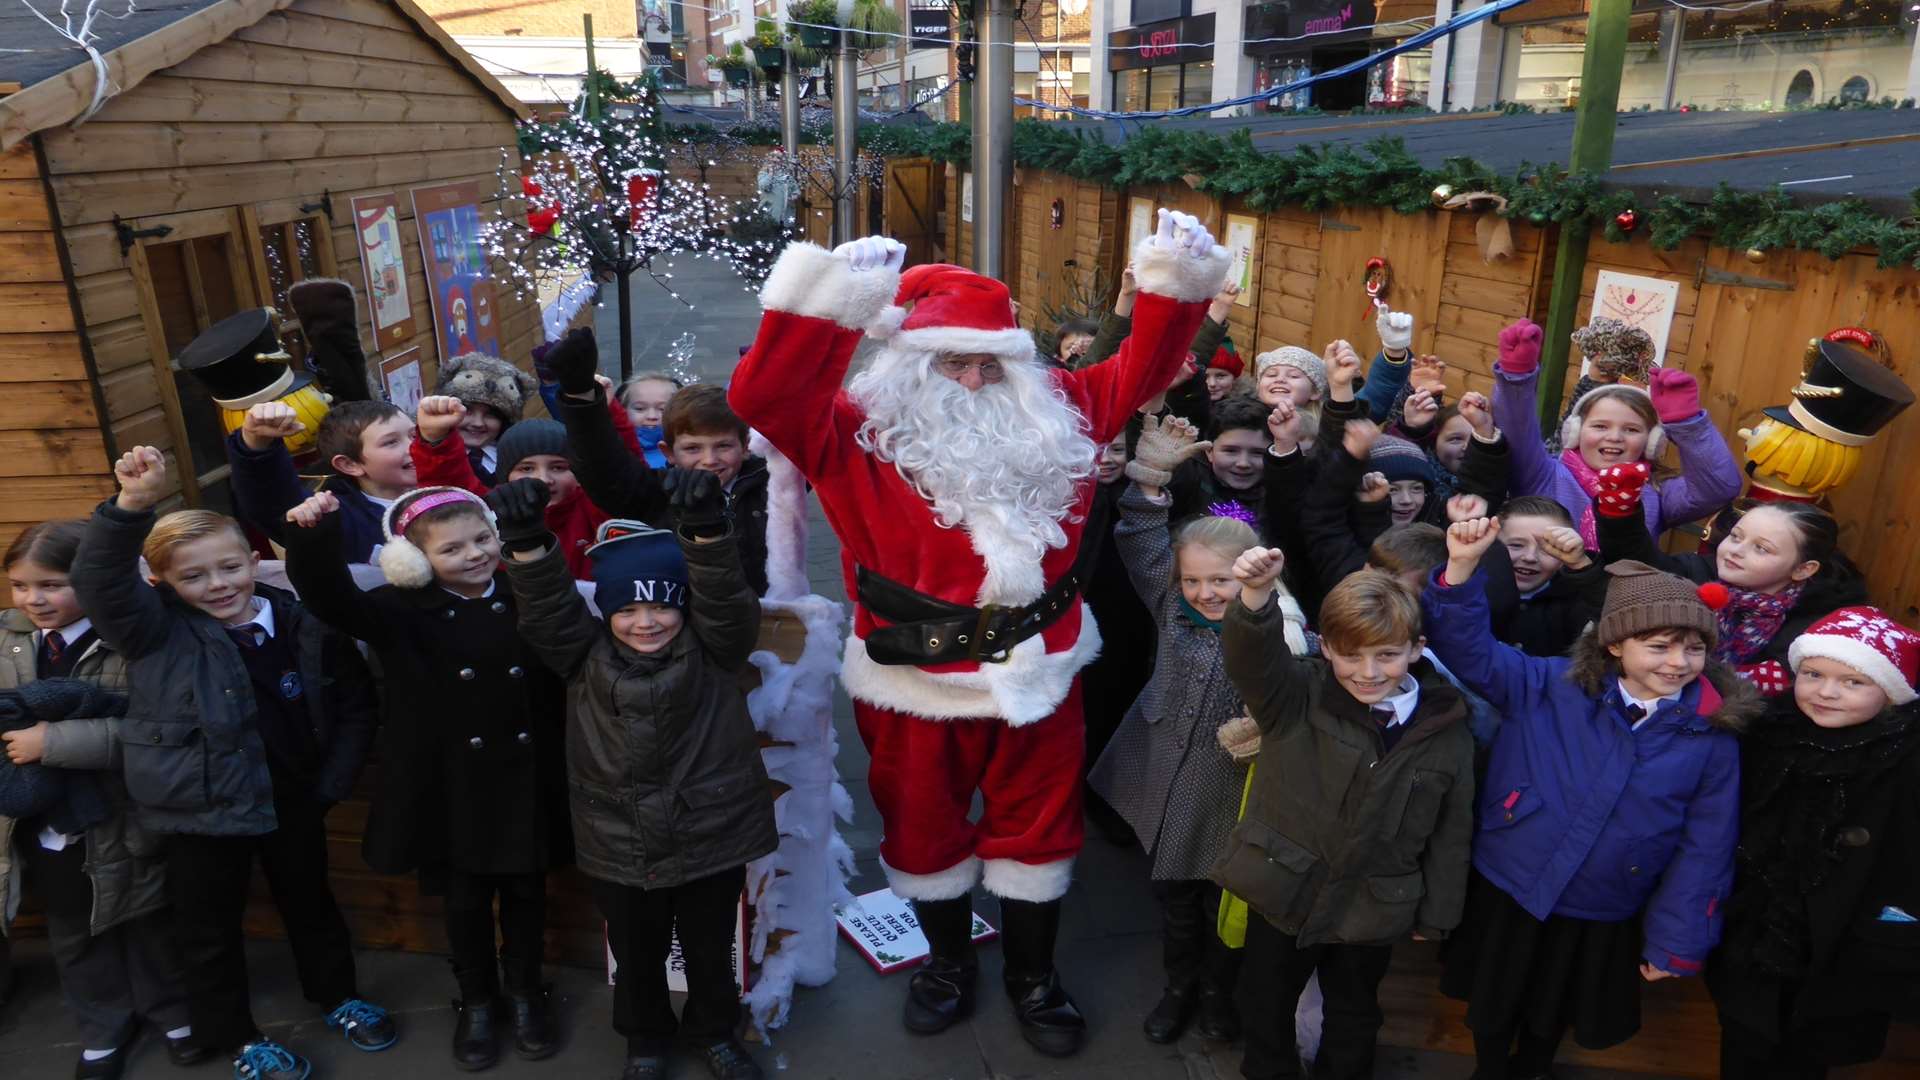 Hirst Class from Joy Lane Primary School won a visit to Santa's grotto in Whitefriars after triumphing at a walk to school challenge